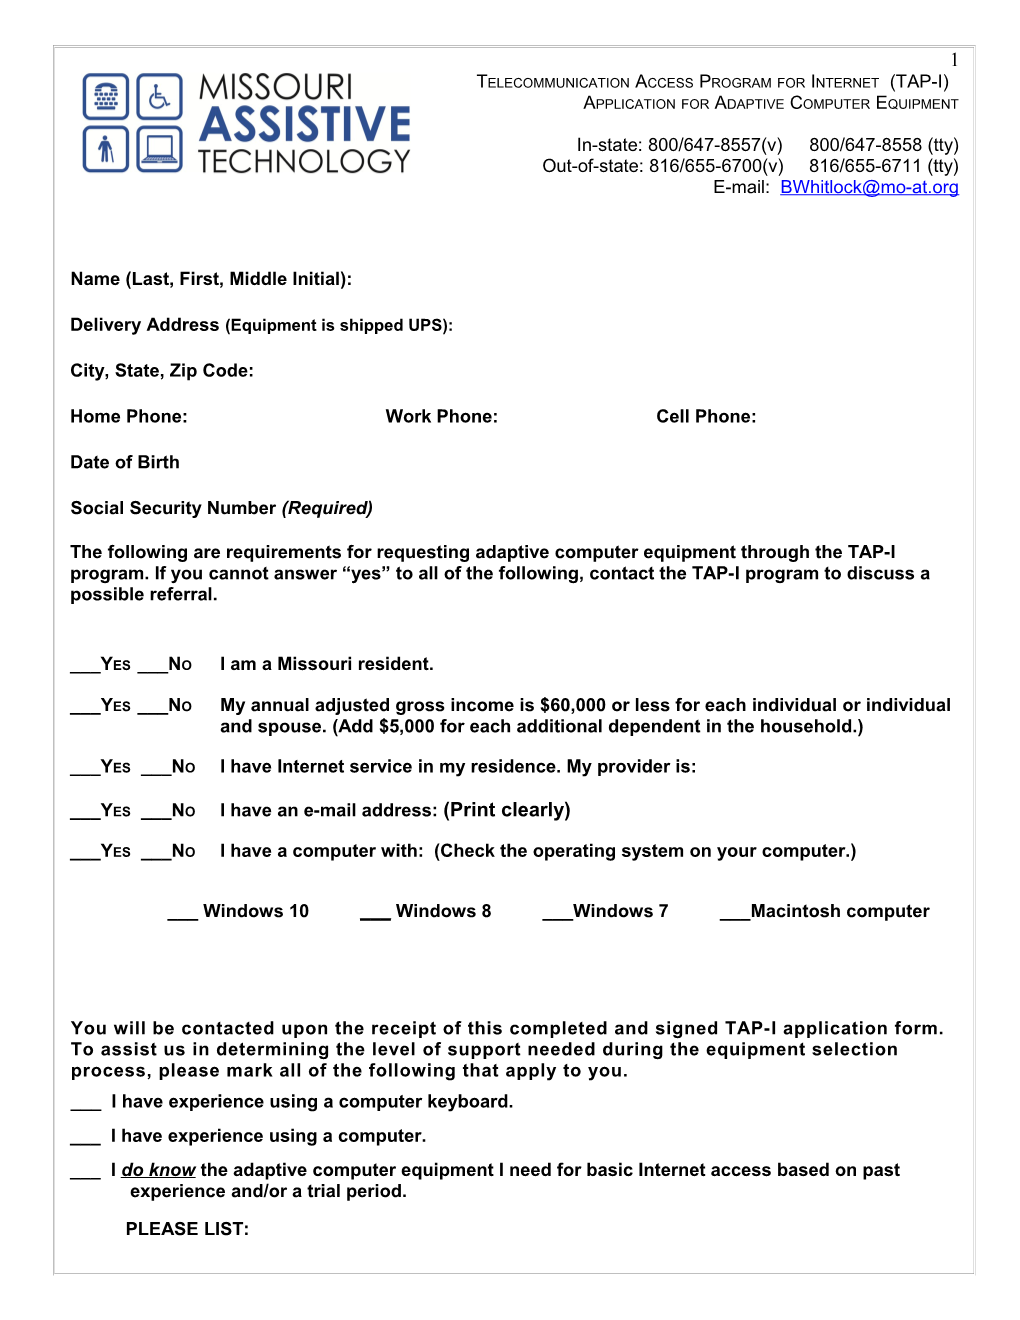 Application for Adaptive Computer Equipment